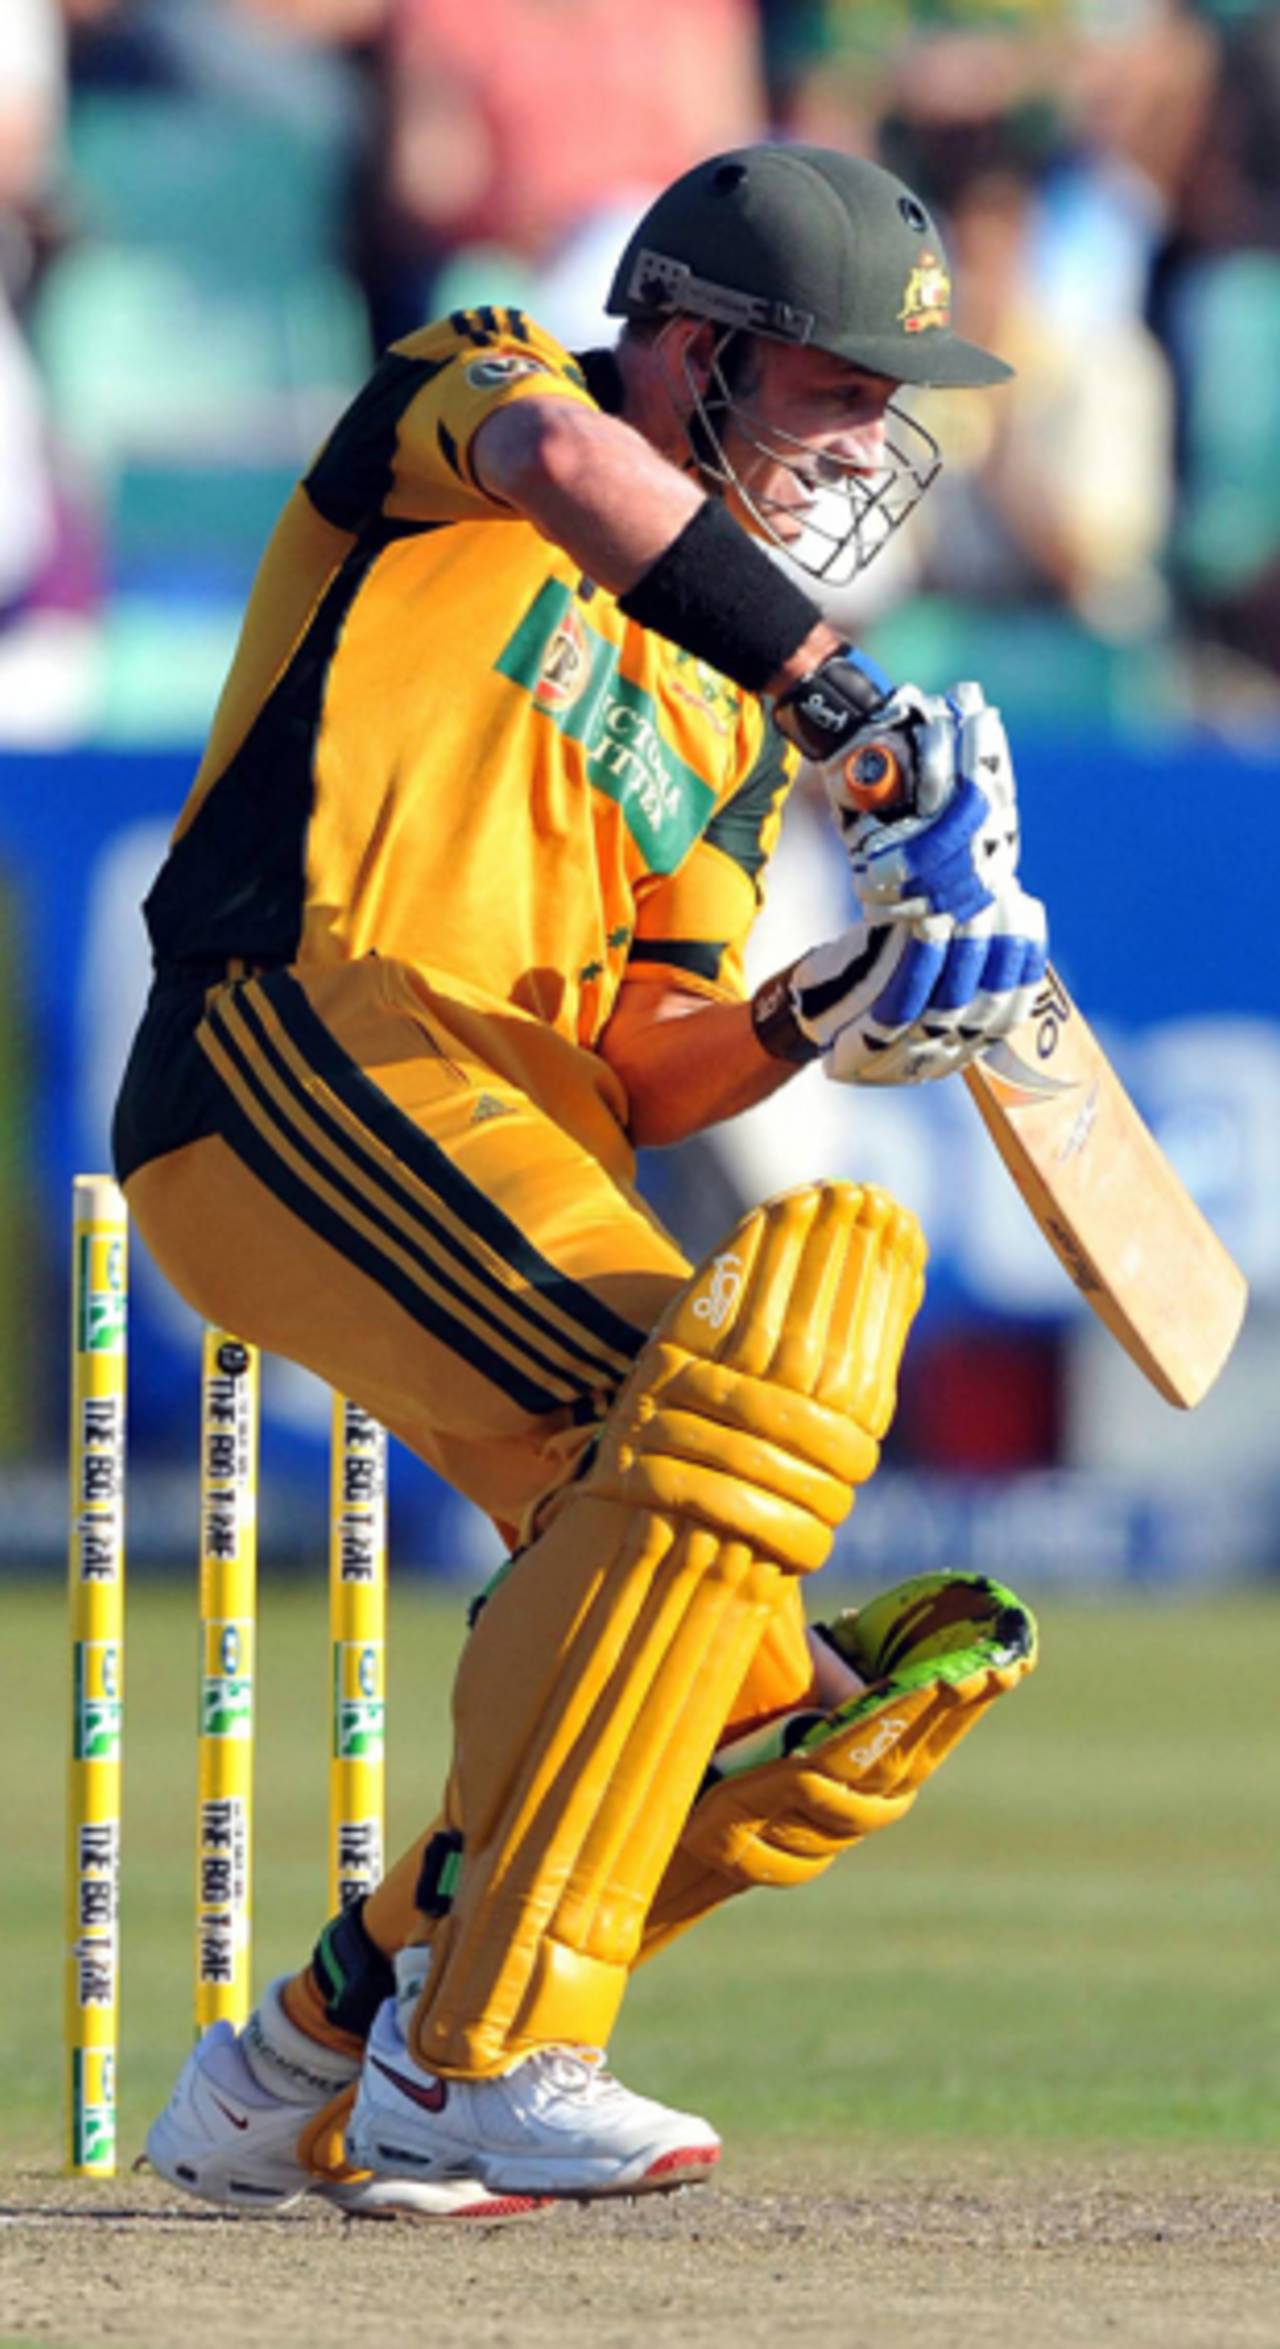 Michael Hussey guides one through the off side, South Africa v Australia, 1st ODI, Durban, April 3, 2009